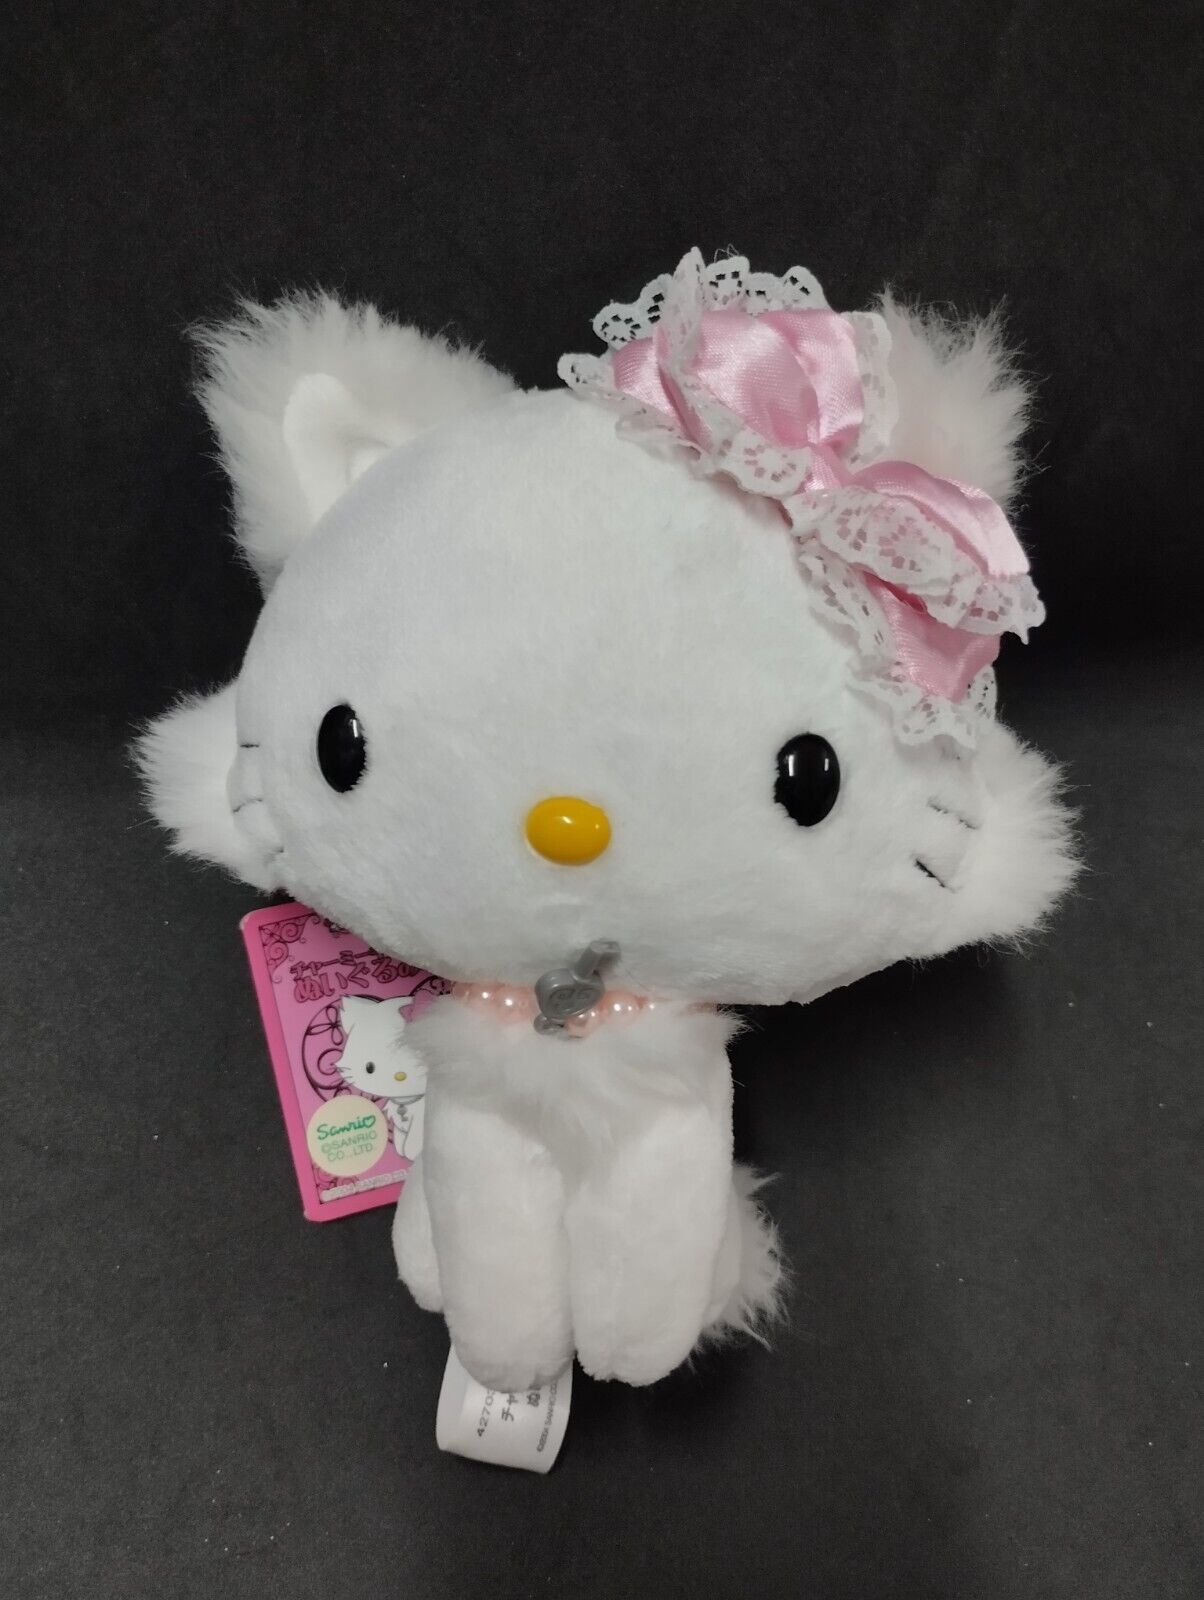 Charmmy Kitty Light Pink Bow 6